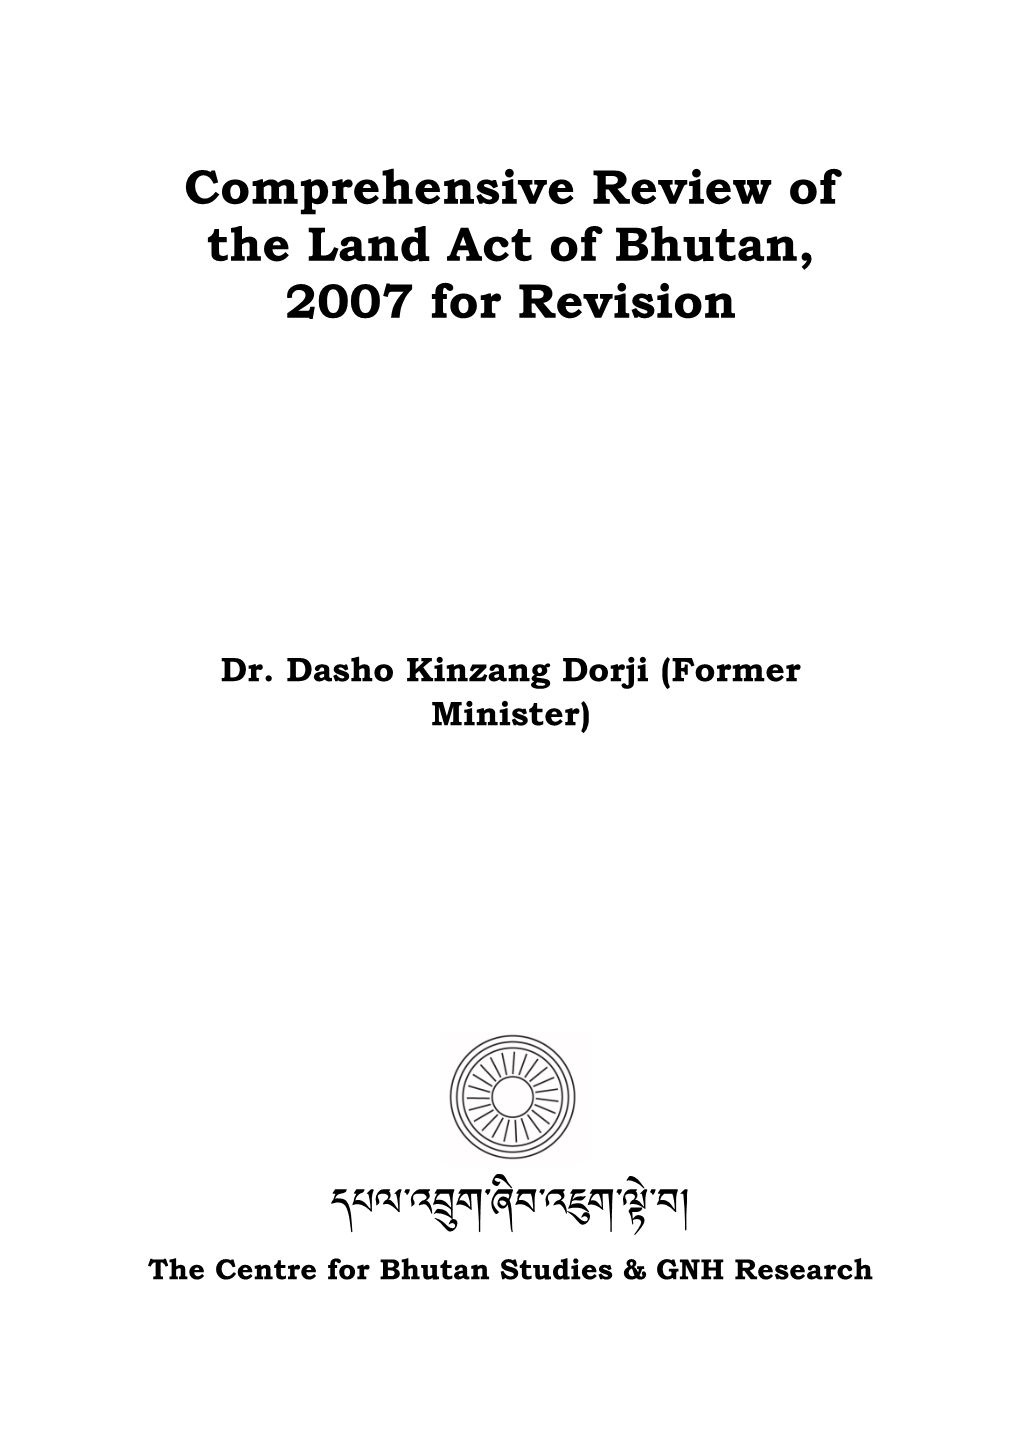 Comprehensive Review of the Land Act of Bhutan, 2007 for Revision